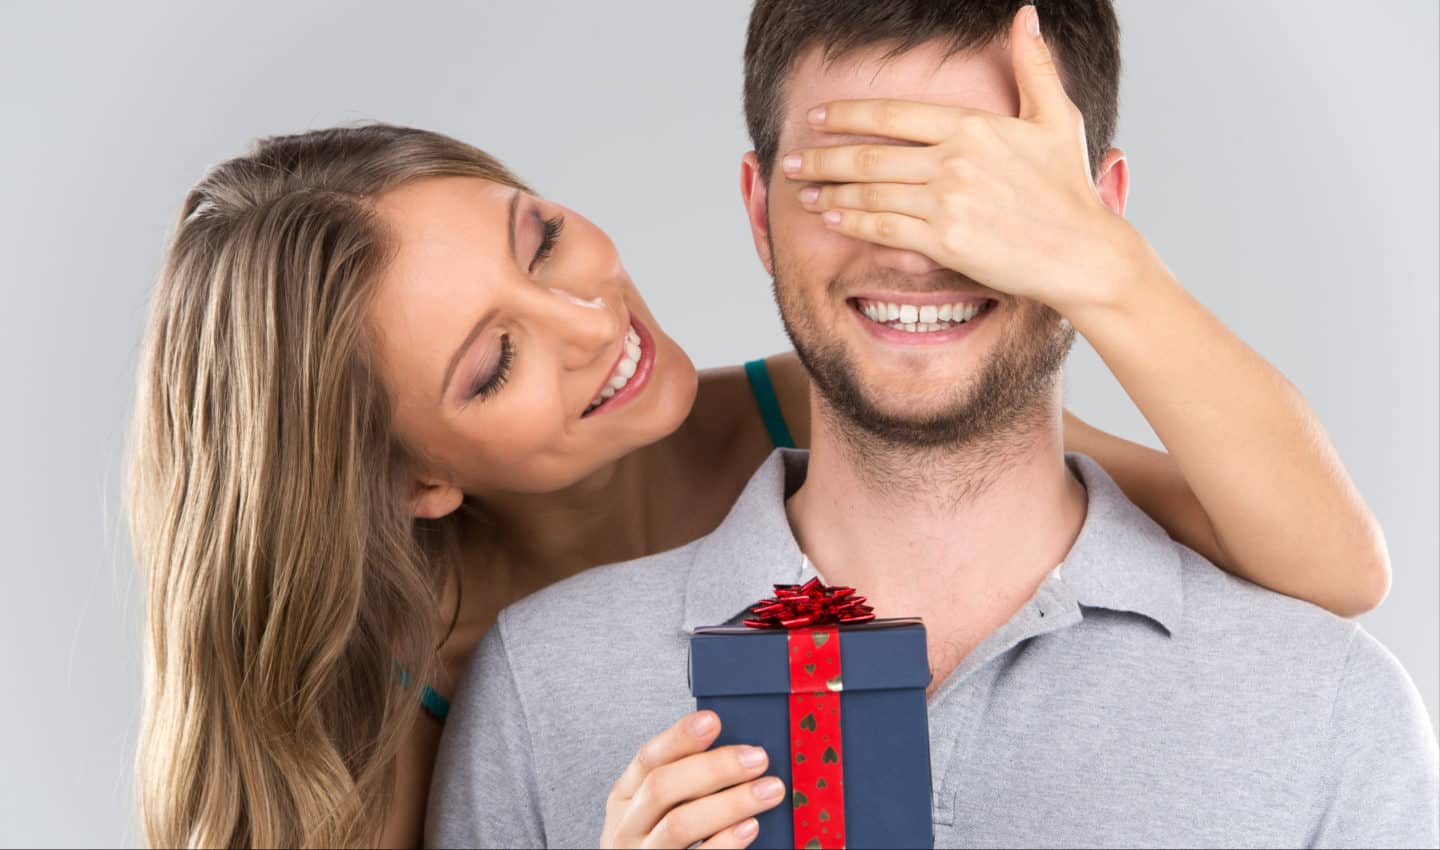 Best Gifts to Give for Him